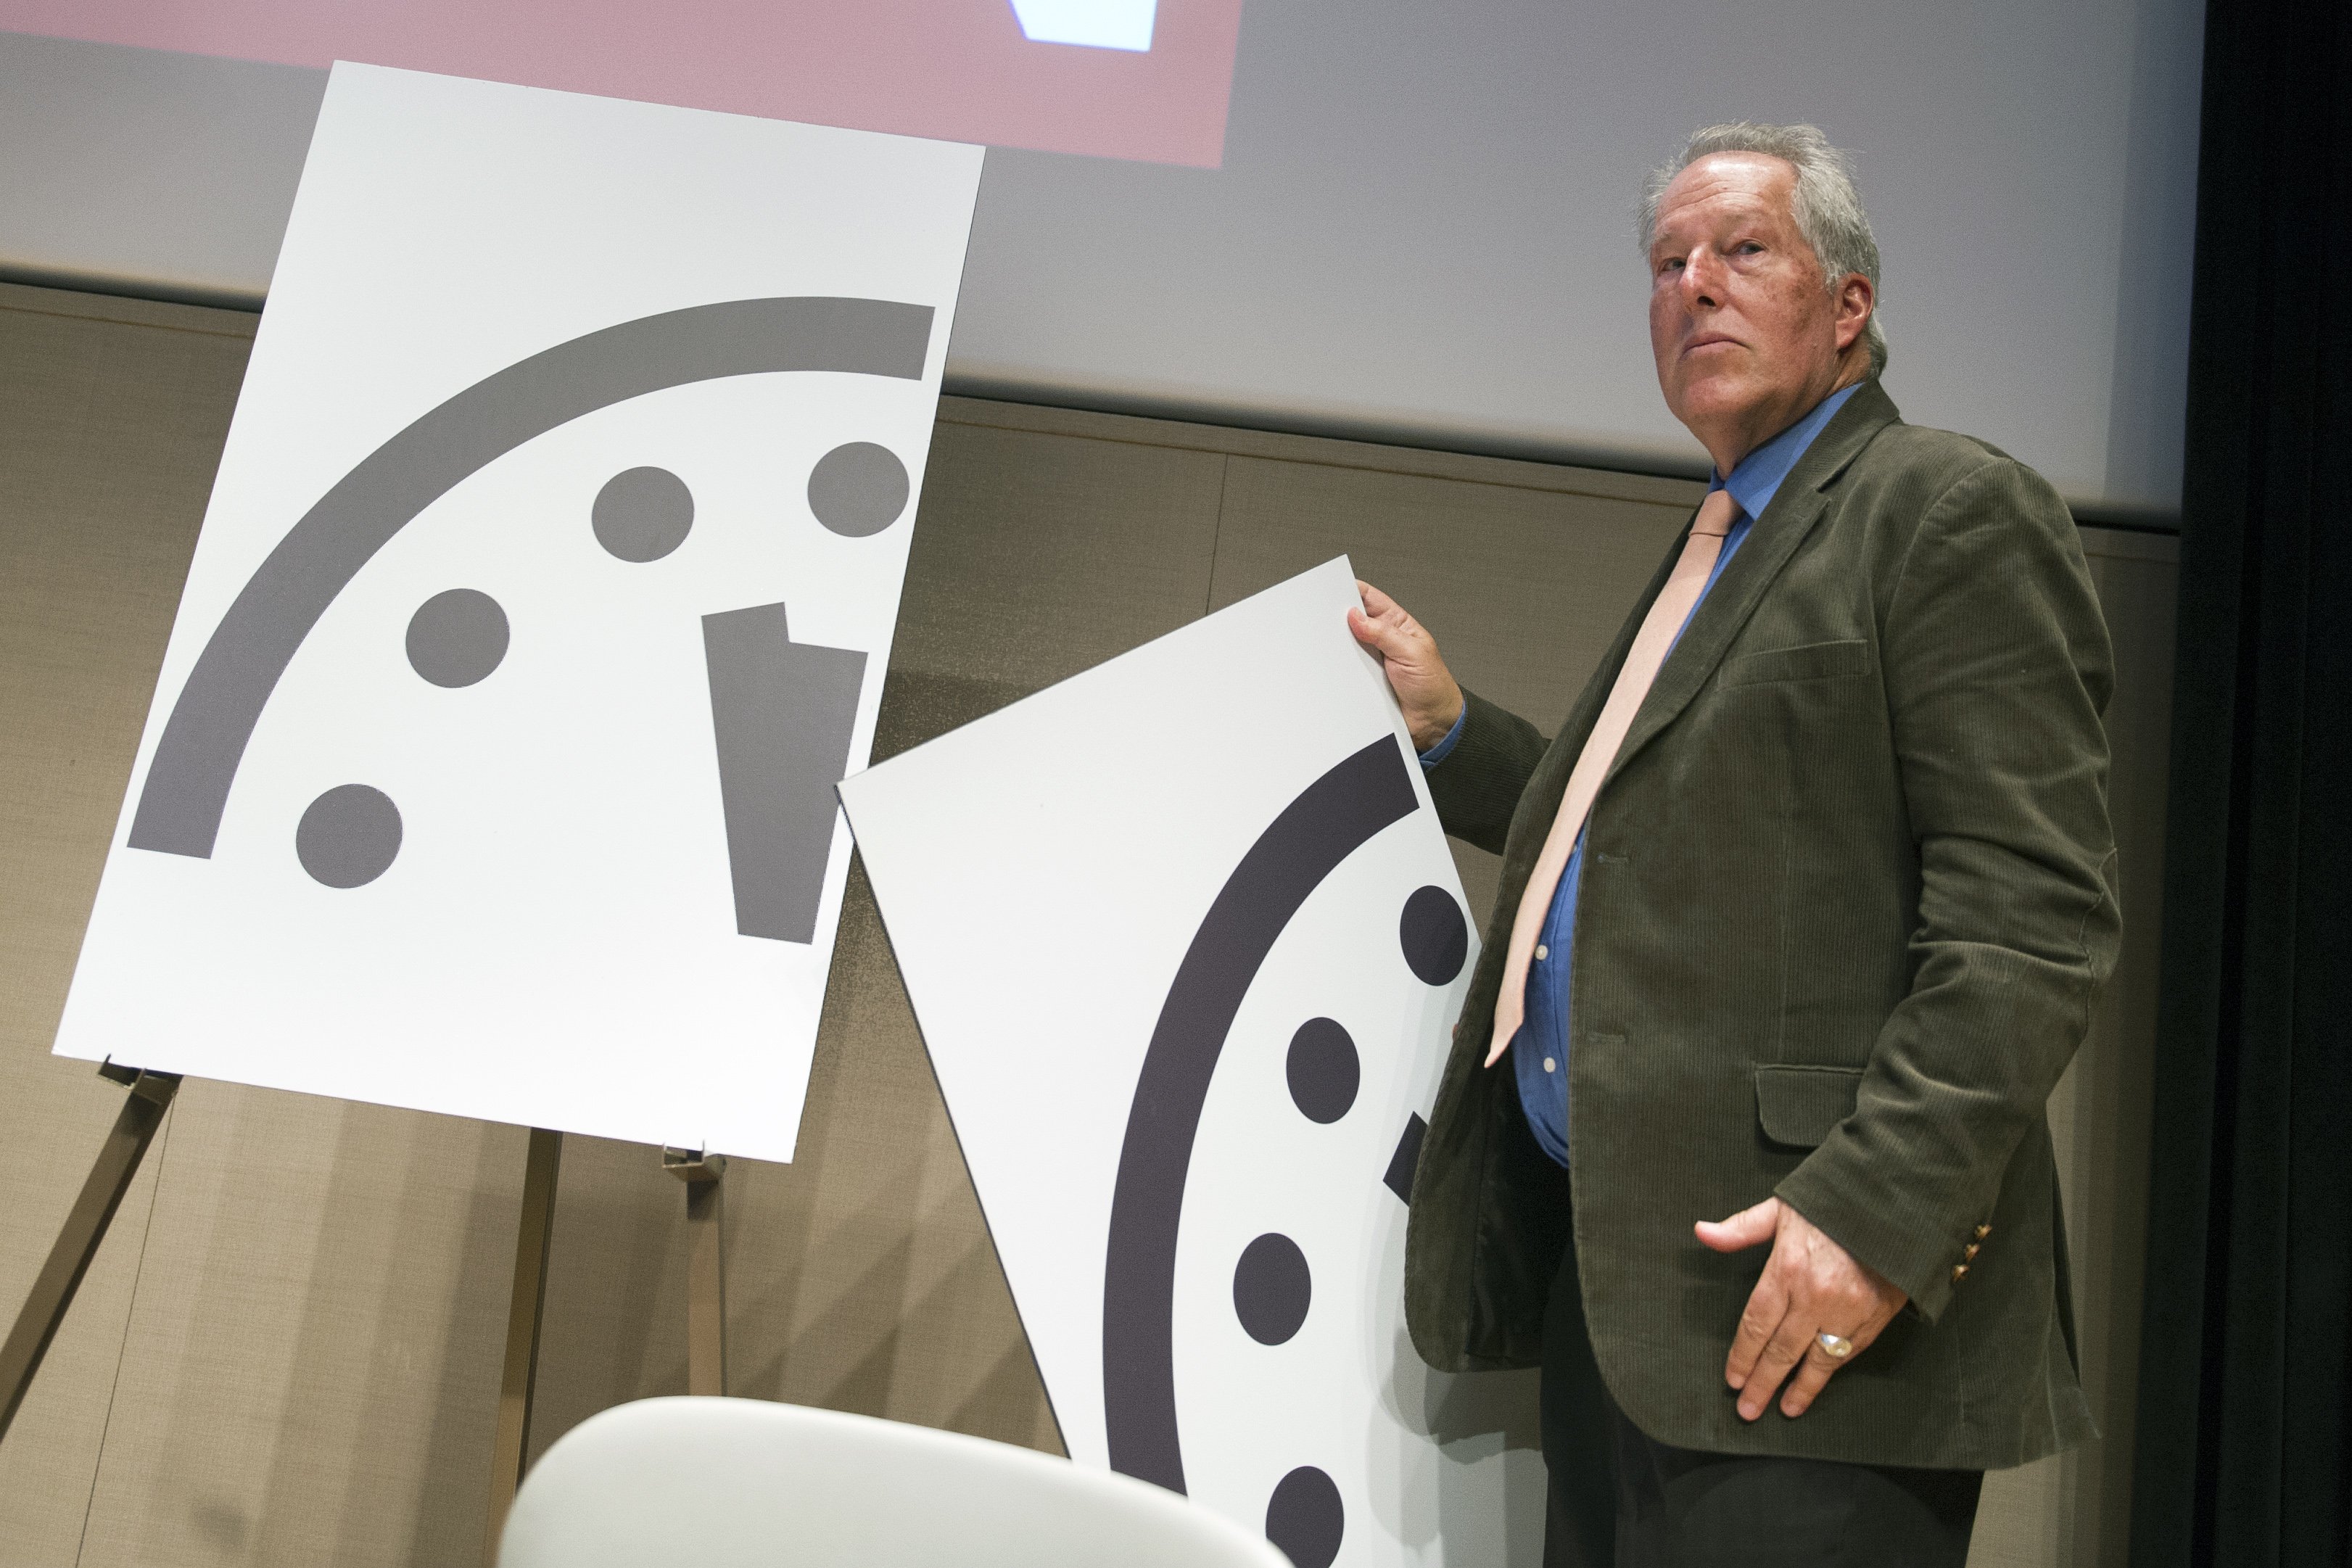 Climate scientist Richard Somerville, a member, Science and Security Board, Bulletin of the Atomic Scientists, unveils the new Doomsday Clock in Washington on Jan. 22, 2015. (Cliff Owen—AP)